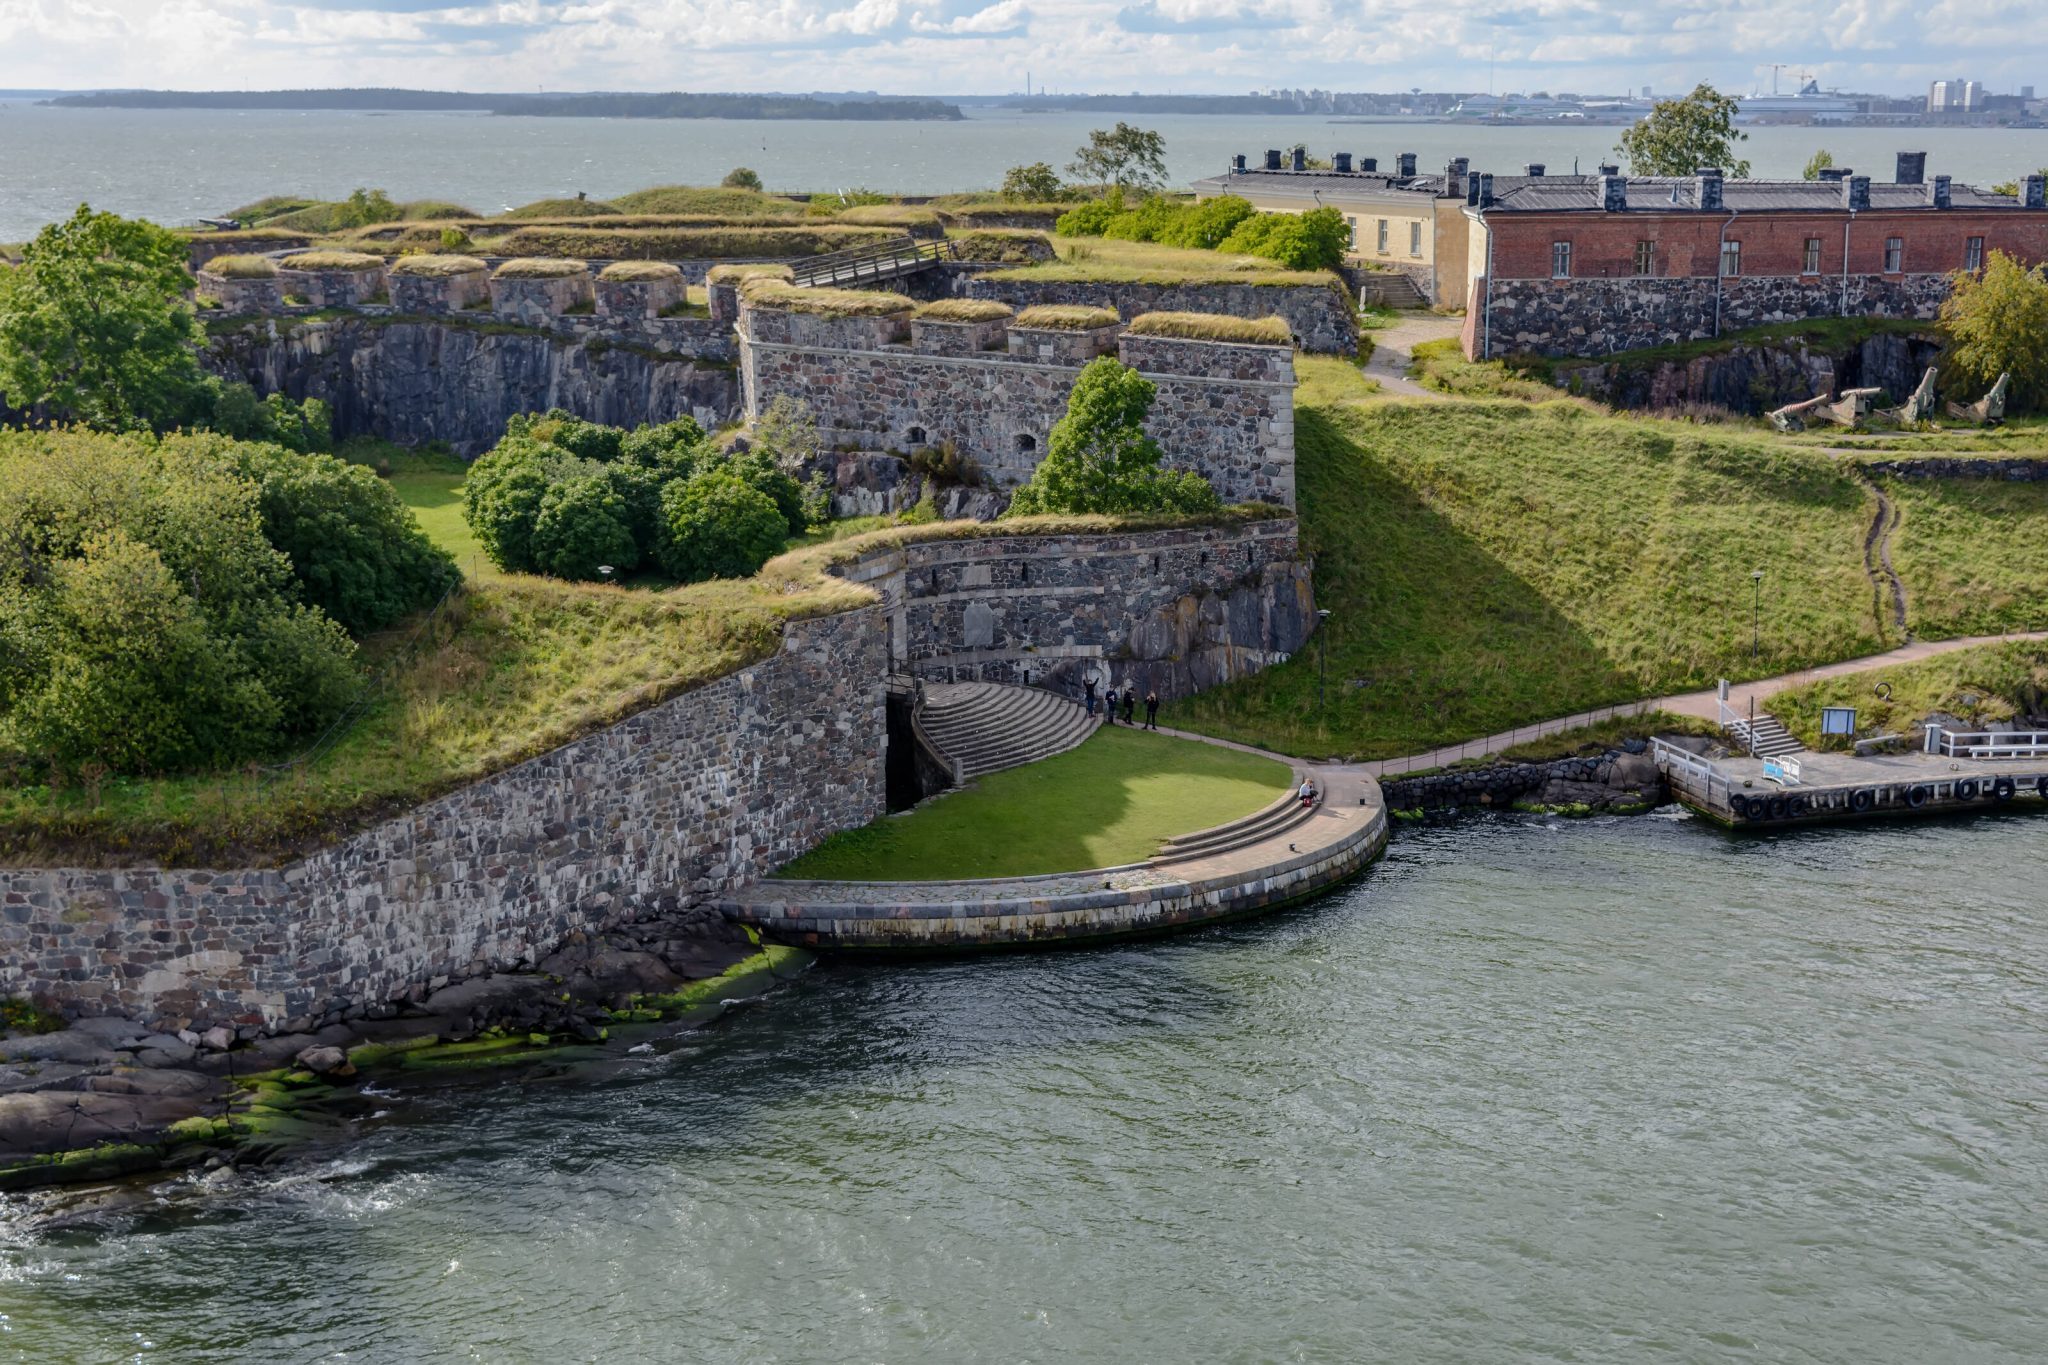 A birds eye view of the Suomenlinna fortress in summer 